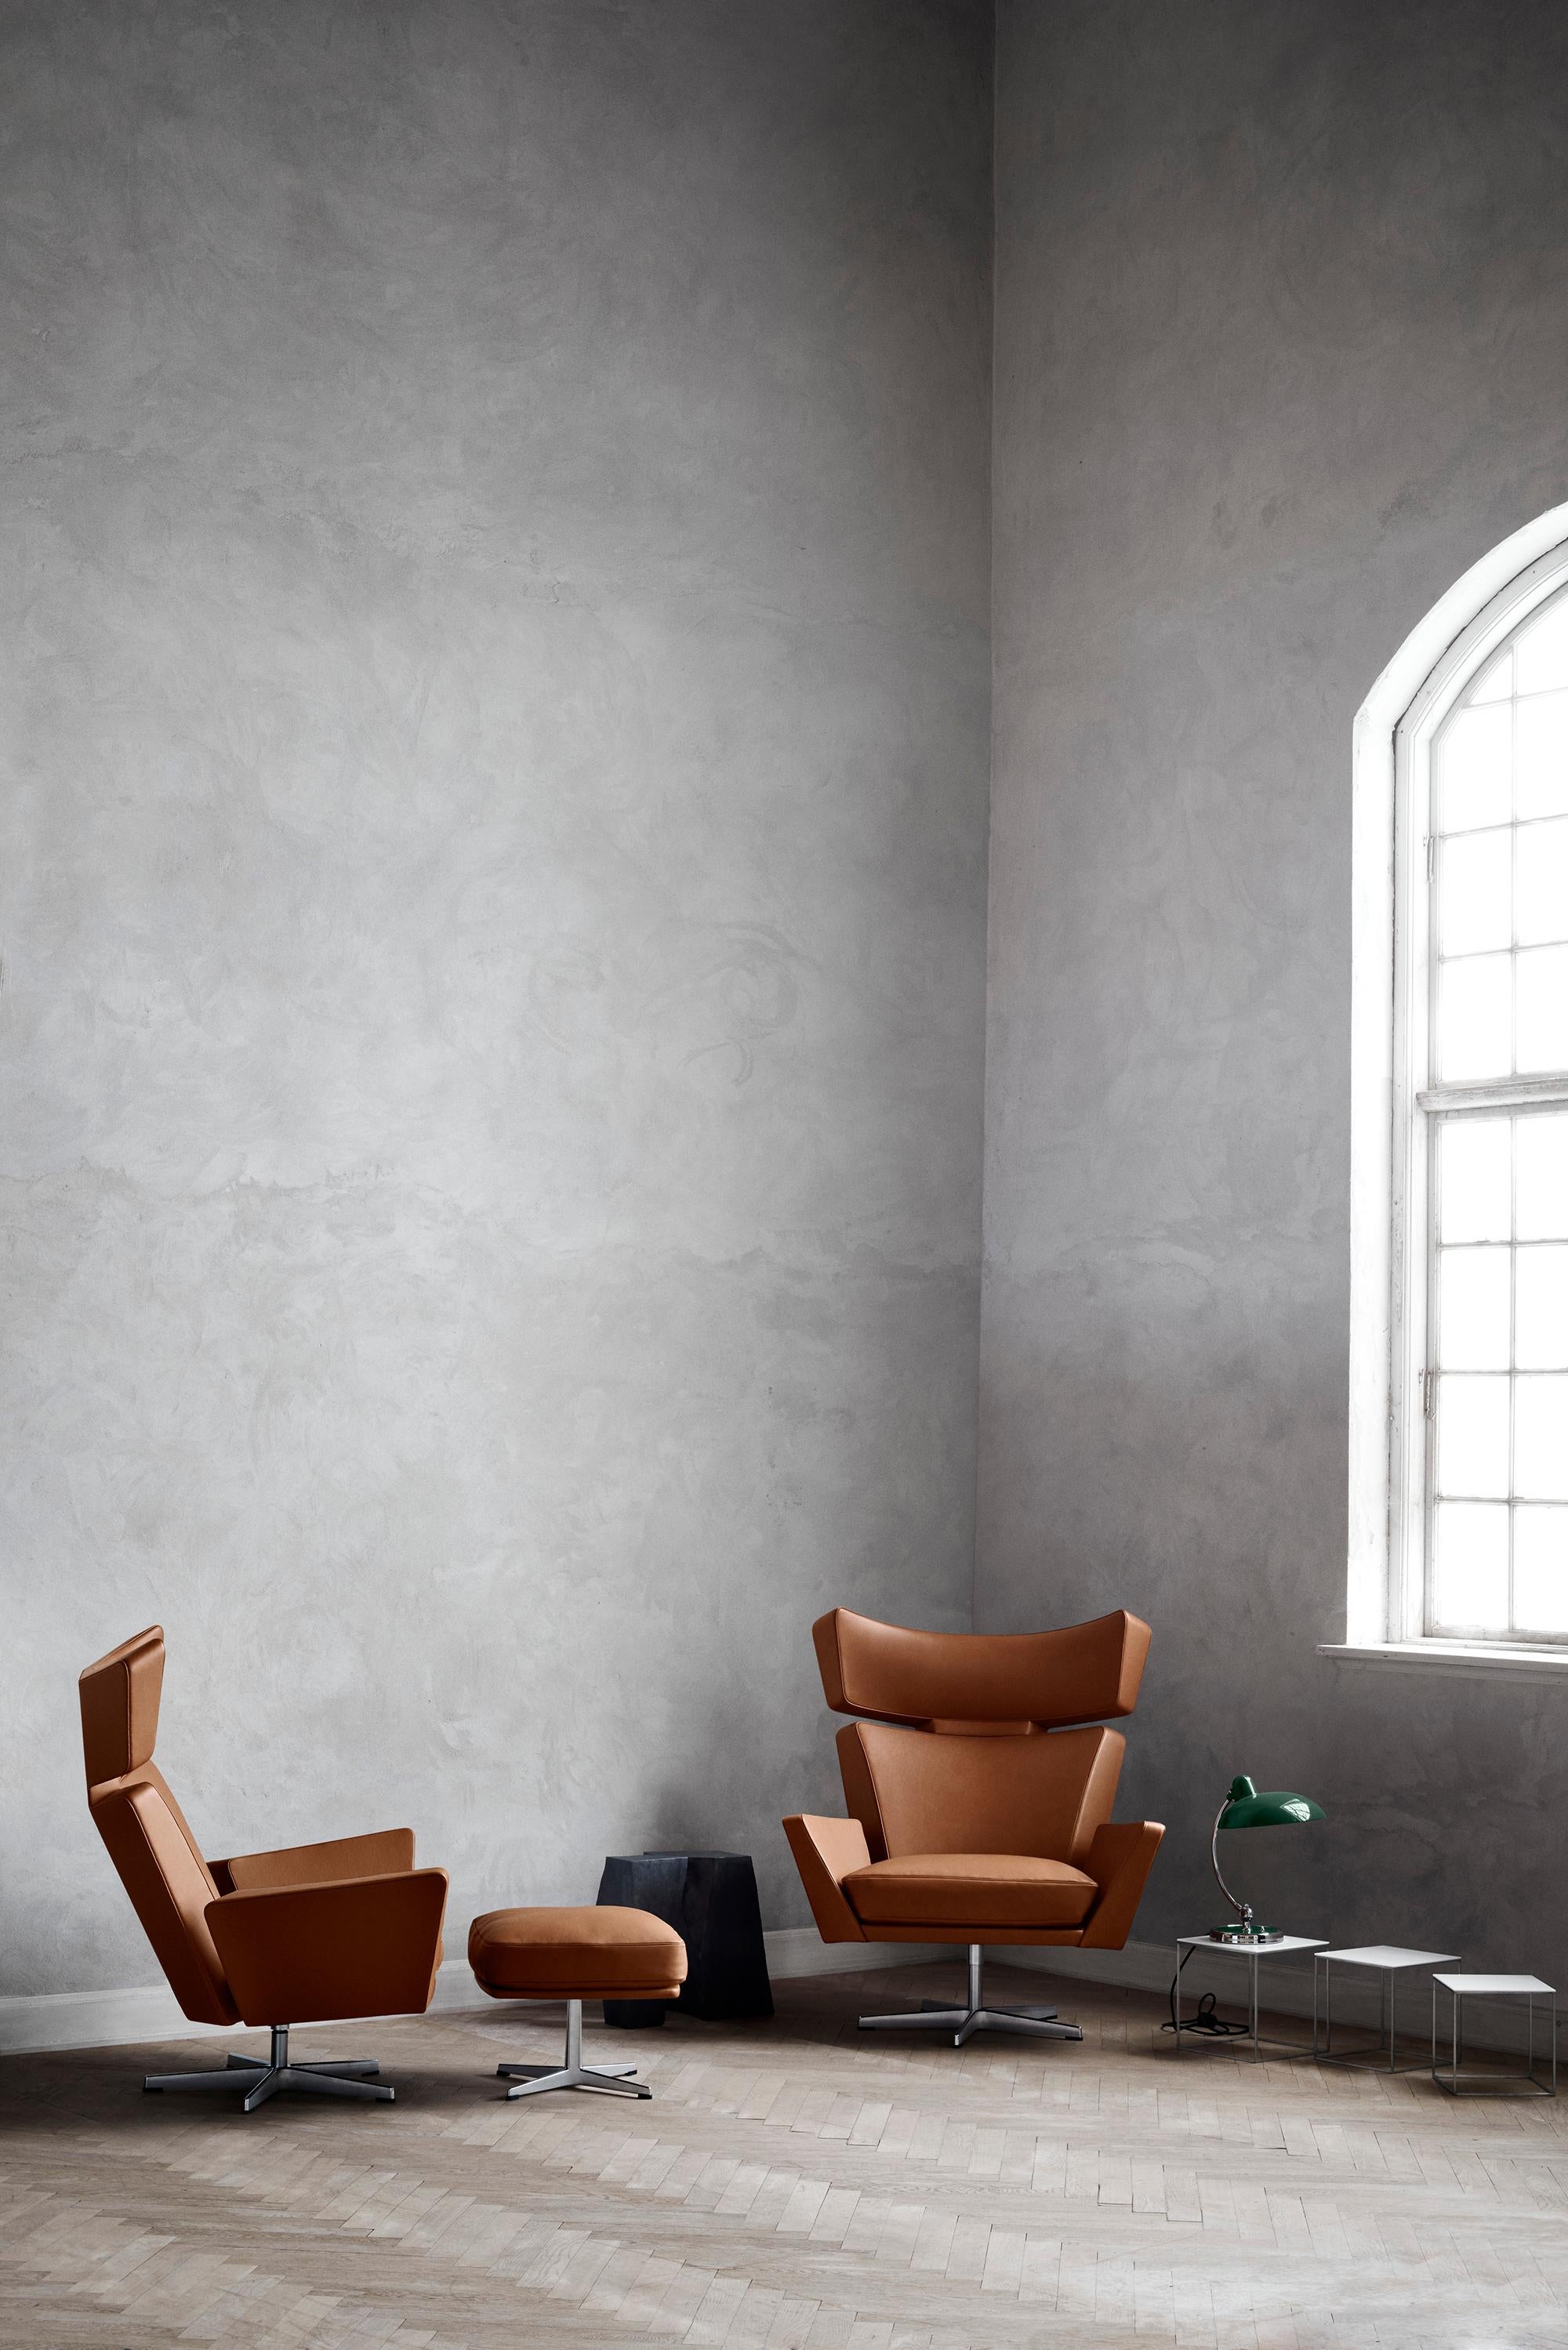 Arne Jacobsen 'Oksen' Chair for Fritz Hansen in Essential Leather Upholstery.

Established in 1872, Fritz Hansen has become synonymous with legendary Danish design. Combining timeless craftsmanship with an emphasis on sustainability, the brand’s